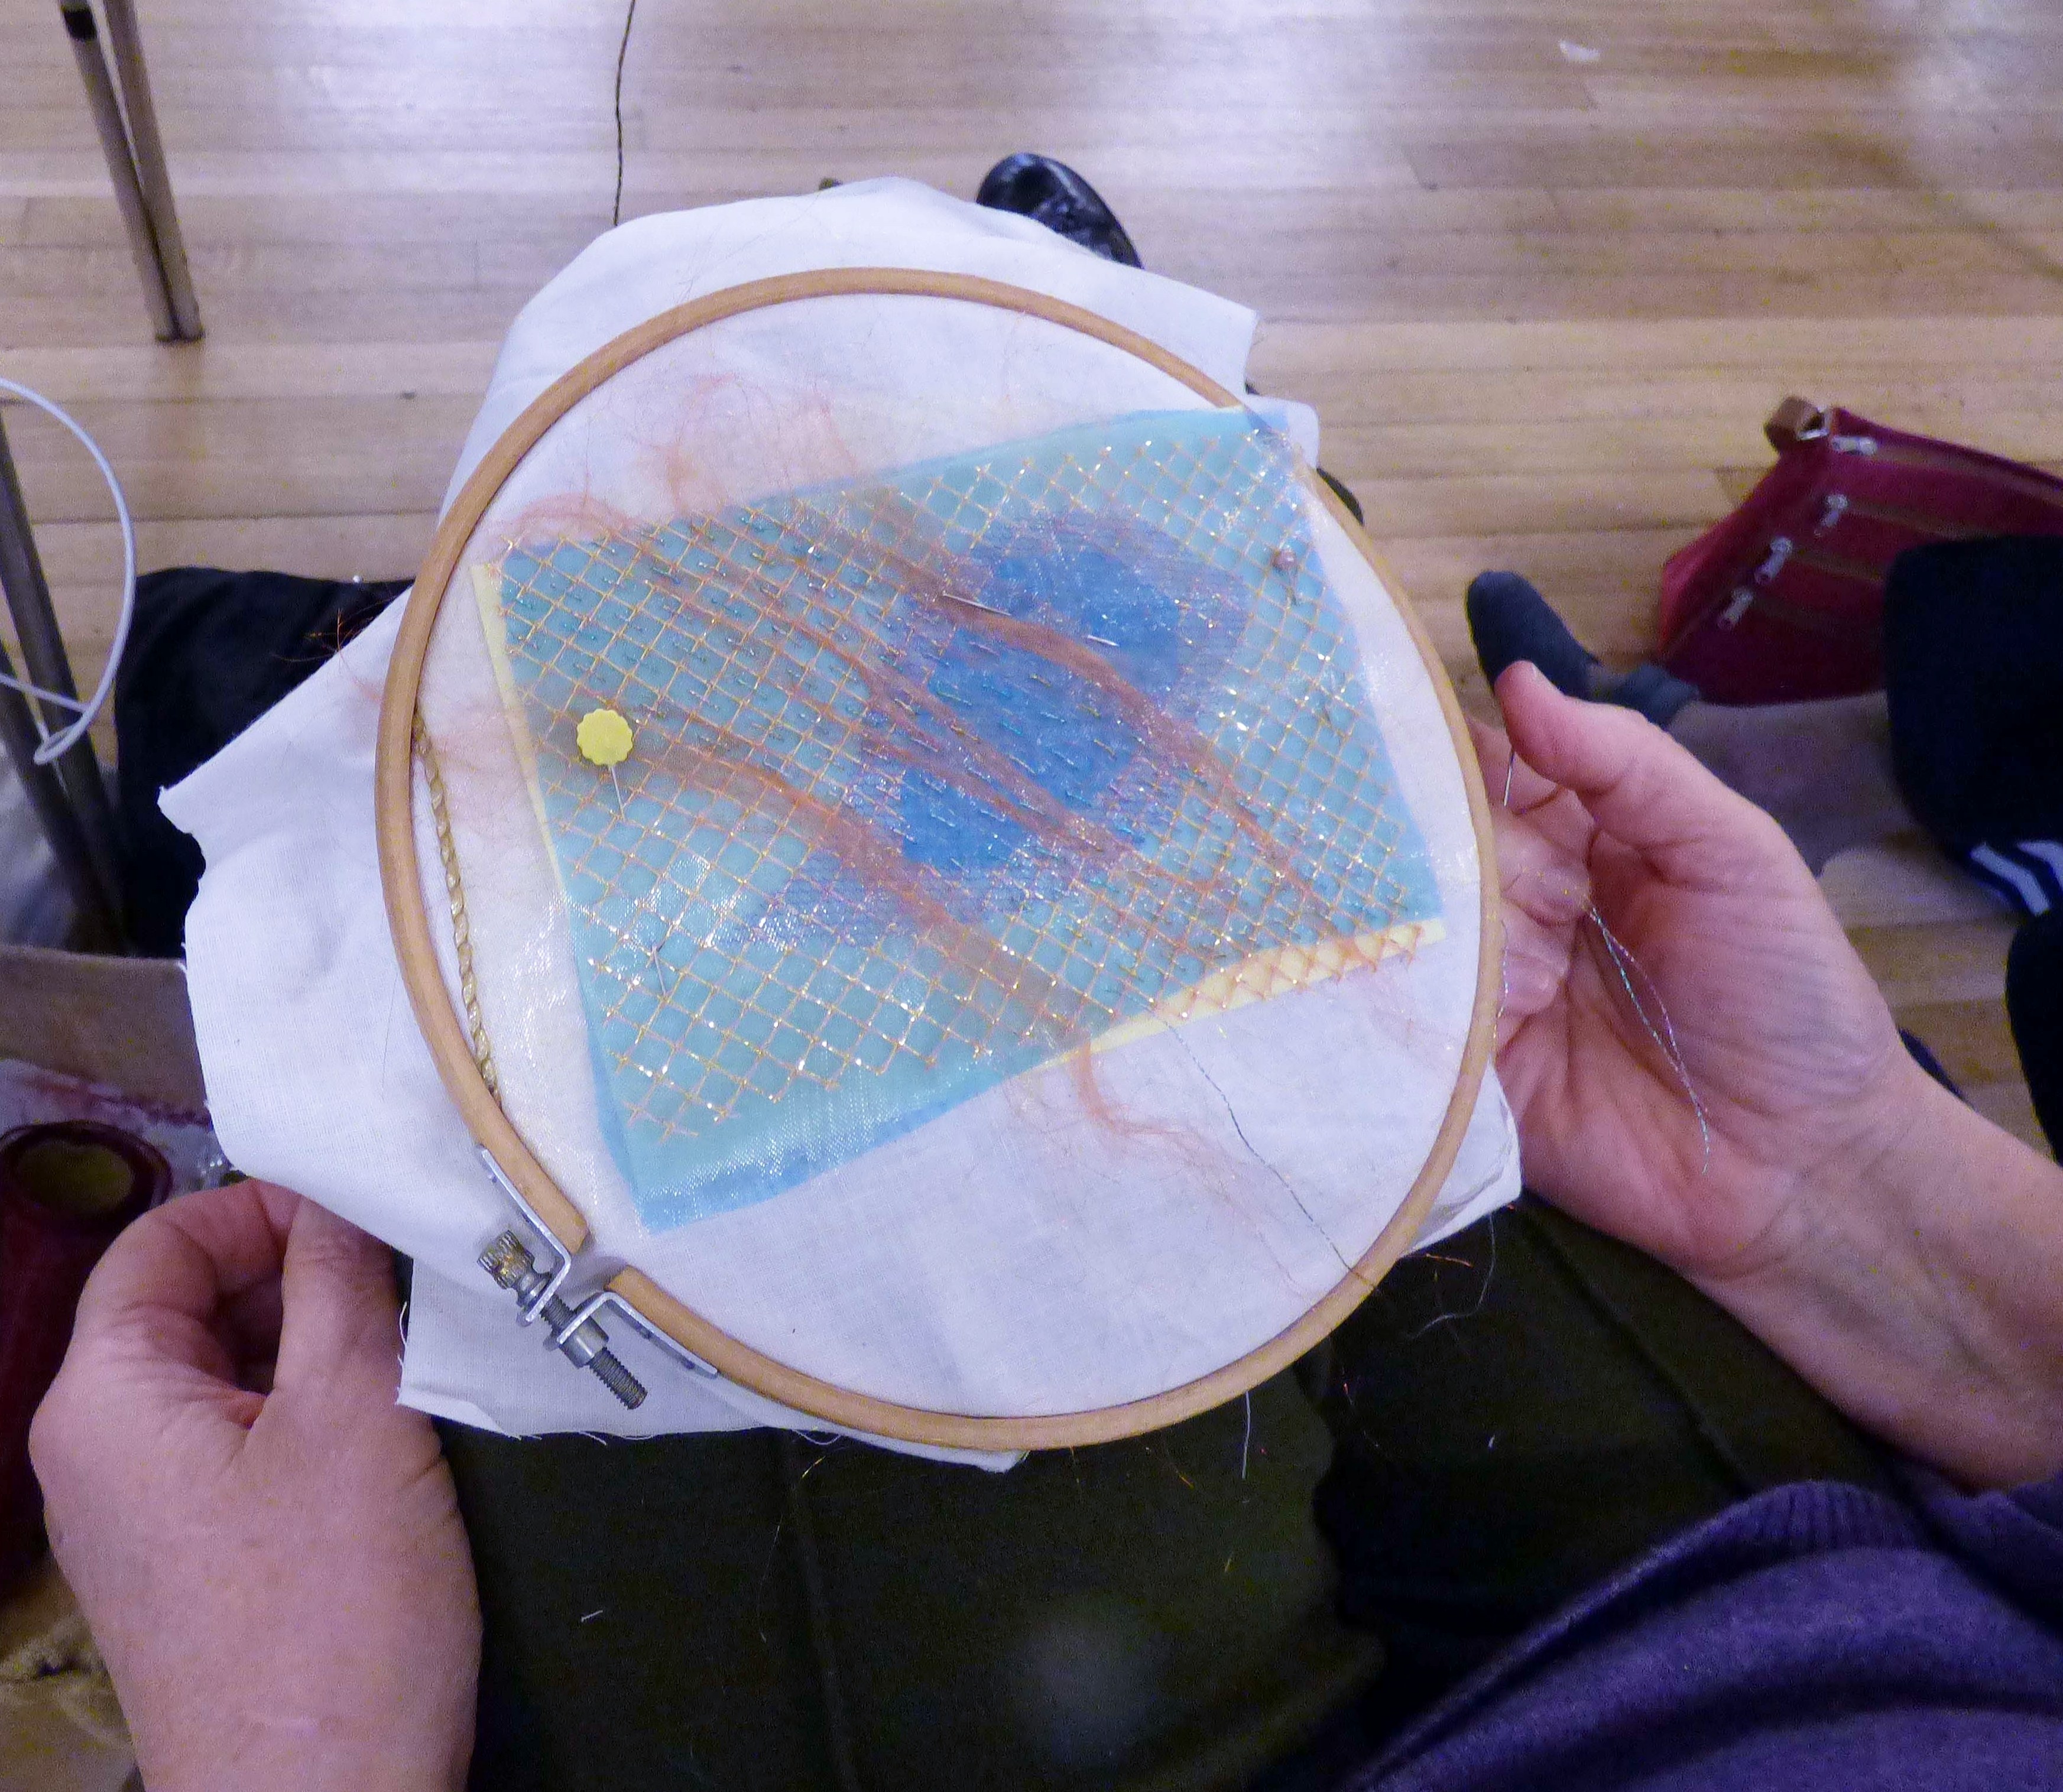 student's work at Layers, Texturing and Stitch workshop by Gill Roberts 2022